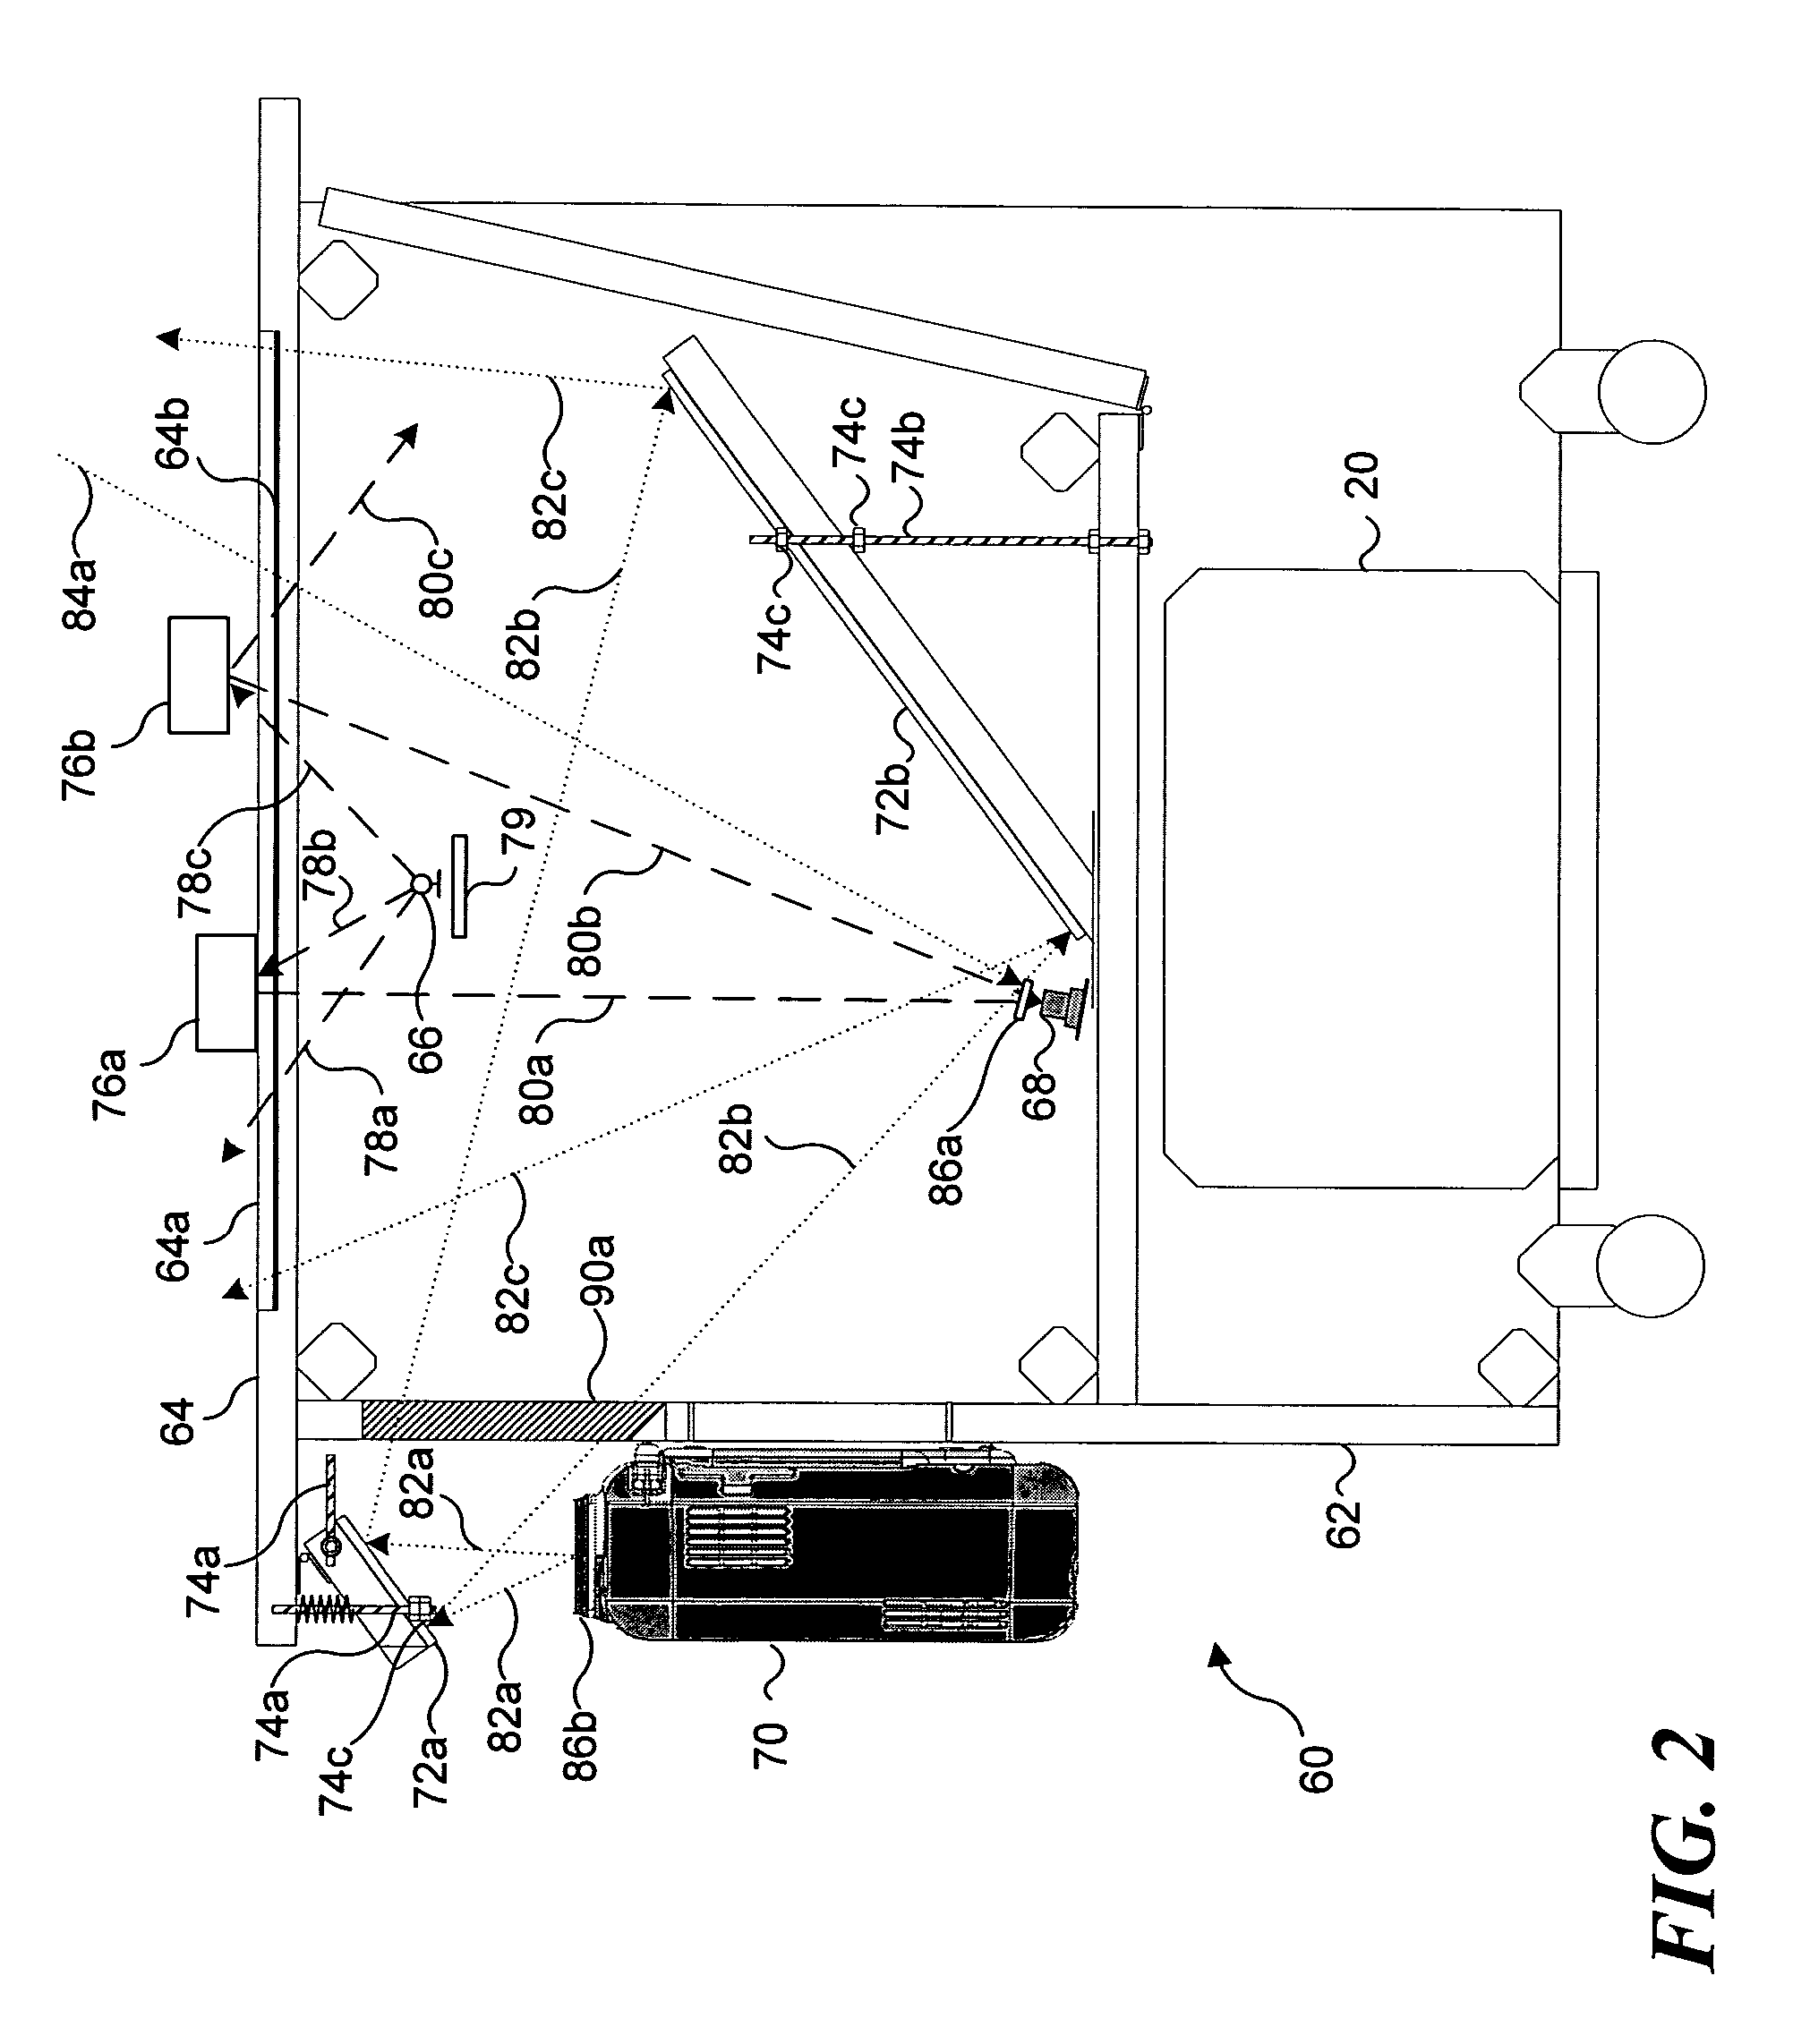 Using a physical object to control an attribute of an interactive display application